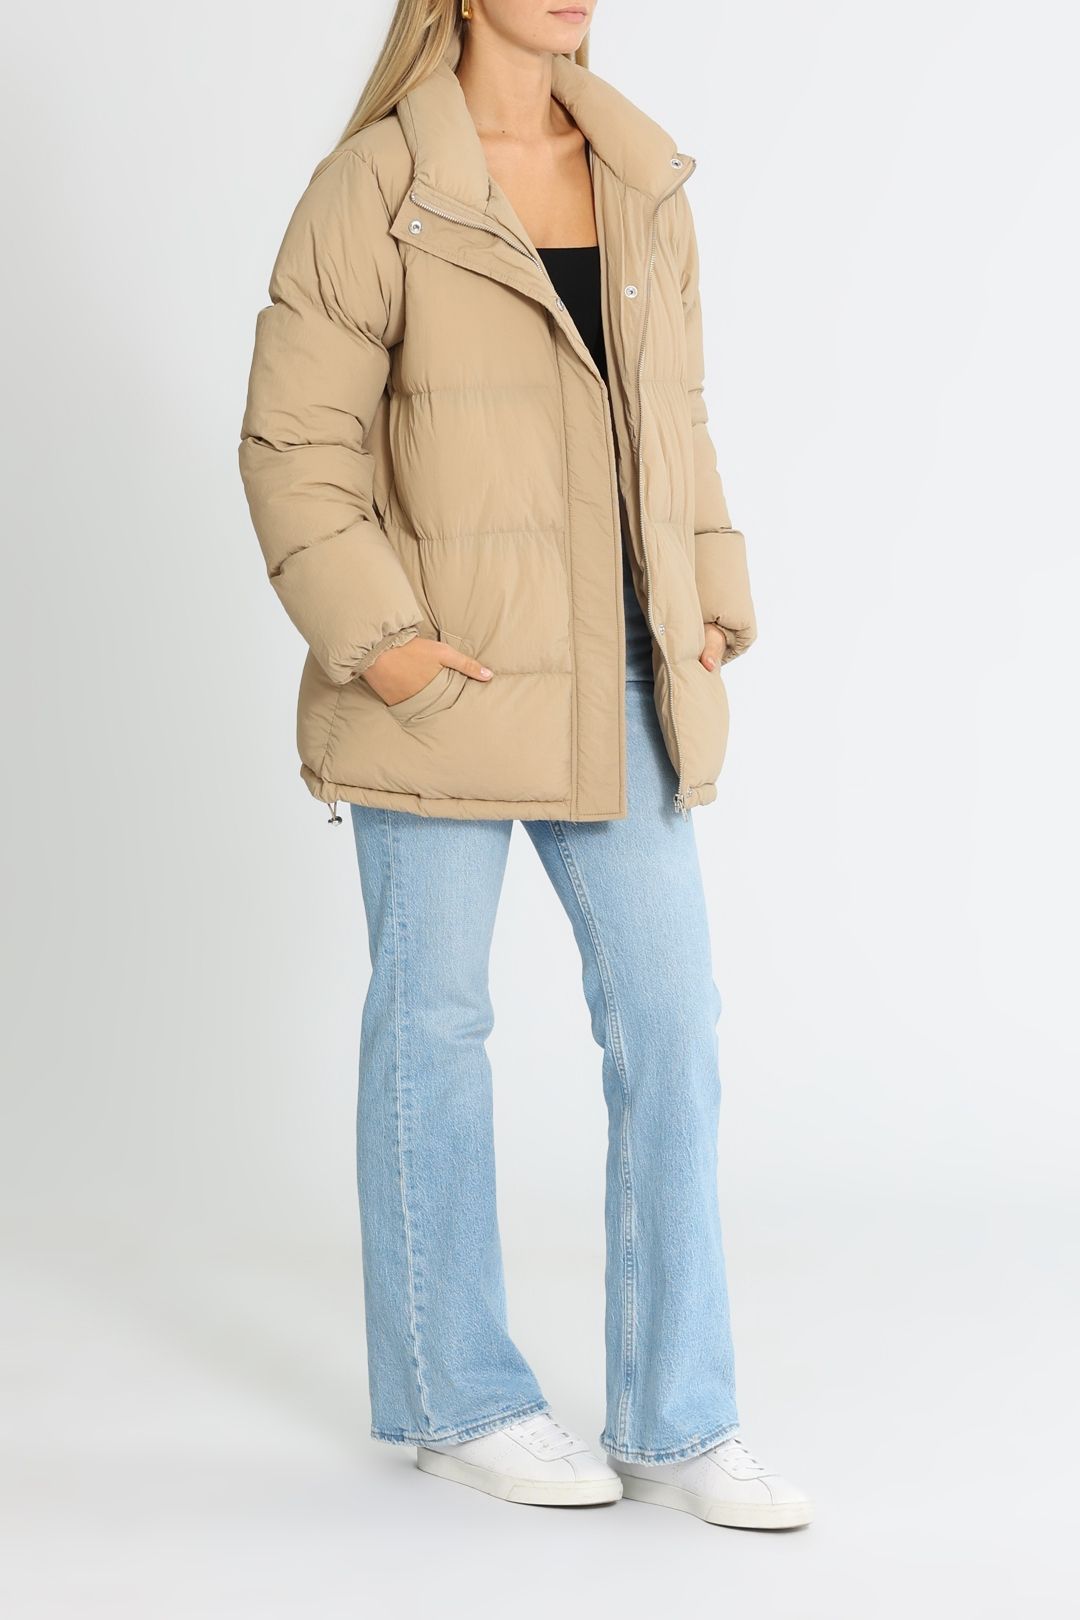 Nude Lucy Topher Longline Puffer Sepia Long Sleeves